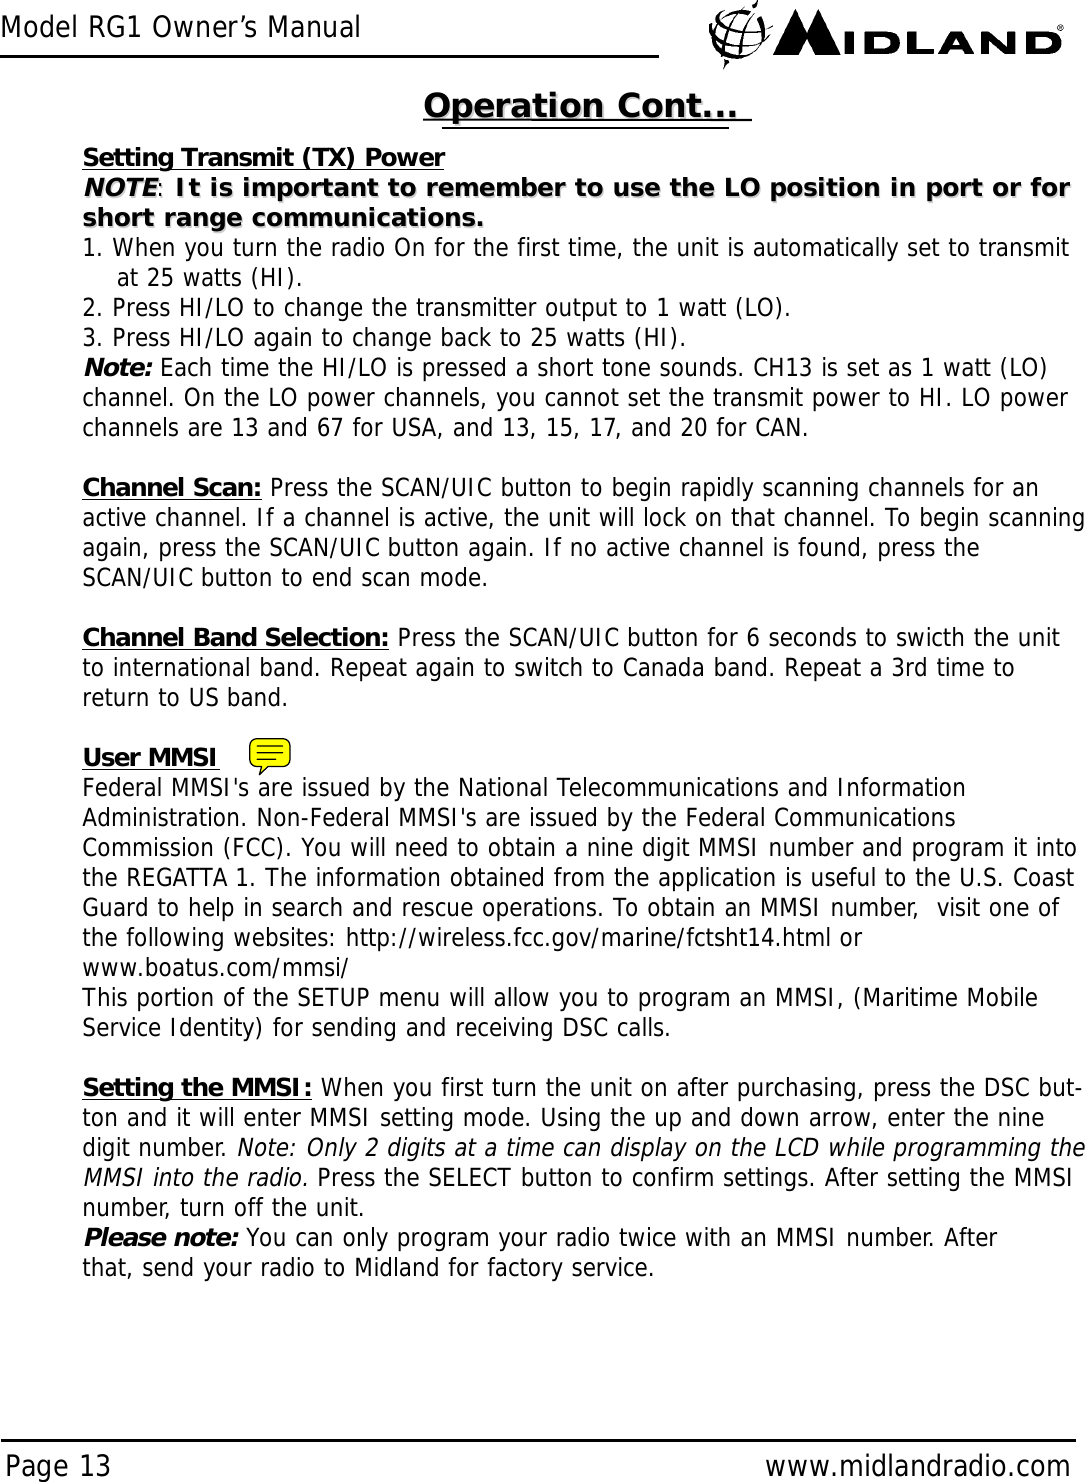 Model RG1 Owner’s ManualPage 13 www.midlandradio.comSetting Transmit (TX) PowerNOTENOTE::It is important to remember to use the LO position in port or forIt is important to remember to use the LO position in port or forshort range communications.short range communications.1. When you turn the radio On for the first time, the unit is automatically set to transmit at 25 watts (HI).2. Press HI/LO to change the transmitter output to 1 watt (LO).3. Press HI/LO again to change back to 25 watts (HI).Note:Each time the HI/LO is pressed a short tone sounds. CH13 is set as 1 watt (LO)channel. On the LO power channels, you cannot set the transmit power to HI. LO powerchannels are 13 and 67 for USA, and 13, 15, 17, and 20 for CAN.Channel Scan: Press the SCAN/UIC button to begin rapidly scanning channels for anactive channel. If a channel is active, the unit will lock on that channel. To begin scanningagain, press the SCAN/UIC button again. If no active channel is found, press theSCAN/UIC button to end scan mode.Channel Band Selection: Press the SCAN/UIC button for 6 seconds to swicth the unitto international band. Repeat again to switch to Canada band. Repeat a 3rd time toreturn to US band.User MMSIFederal MMSI&apos;s are issued by the National Telecommunications and InformationAdministration. Non-Federal MMSI&apos;s are issued by the Federal CommunicationsCommission (FCC). You will need to obtain a nine digit MMSI number and program it intothe REGATTA 1. The information obtained from the application is useful to the U.S. CoastGuard to help in search and rescue operations. To obtain an MMSI number,  visit one ofthe following websites: http://wireless.fcc.gov/marine/fctsht14.html orwww.boatus.com/mmsi/This portion of the SETUP menu will allow you to program an MMSI, (Maritime MobileService Identity) for sending and receiving DSC calls.Setting the MMSI: When you first turn the unit on after purchasing, press the DSC but-ton and it will enter MMSI setting mode. Using the up and down arrow, enter the ninedigit number. Note: Only 2 digits at a time can display on the LCD while programming theMMSI into the radio. Press the SELECT button to confirm settings. After setting the MMSInumber, turn off the unit. Please note:You can only program your radio twice with an MMSI number. Afterthat, send your radio to Midland for factory service.Operation Cont...Operation Cont...